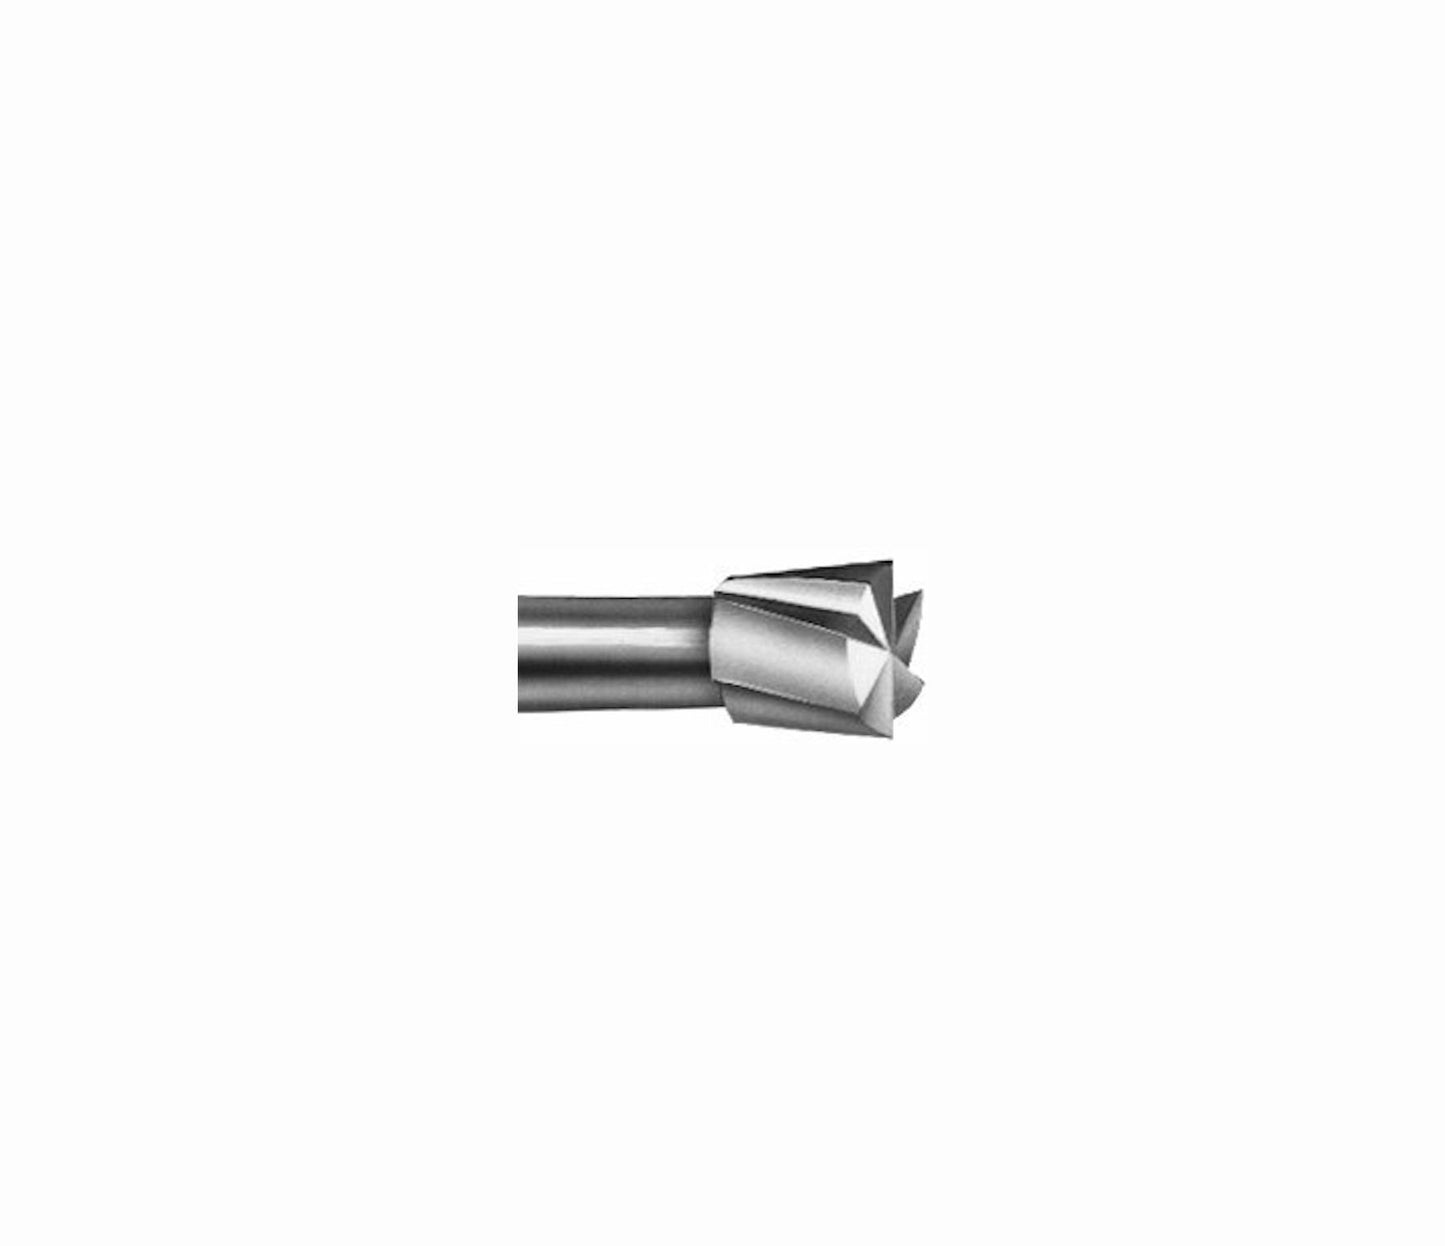 Komet #H30- Carbide Inverted Cone Burr- Pack of 5 (sizes available: 0.60mm-1.60mm)